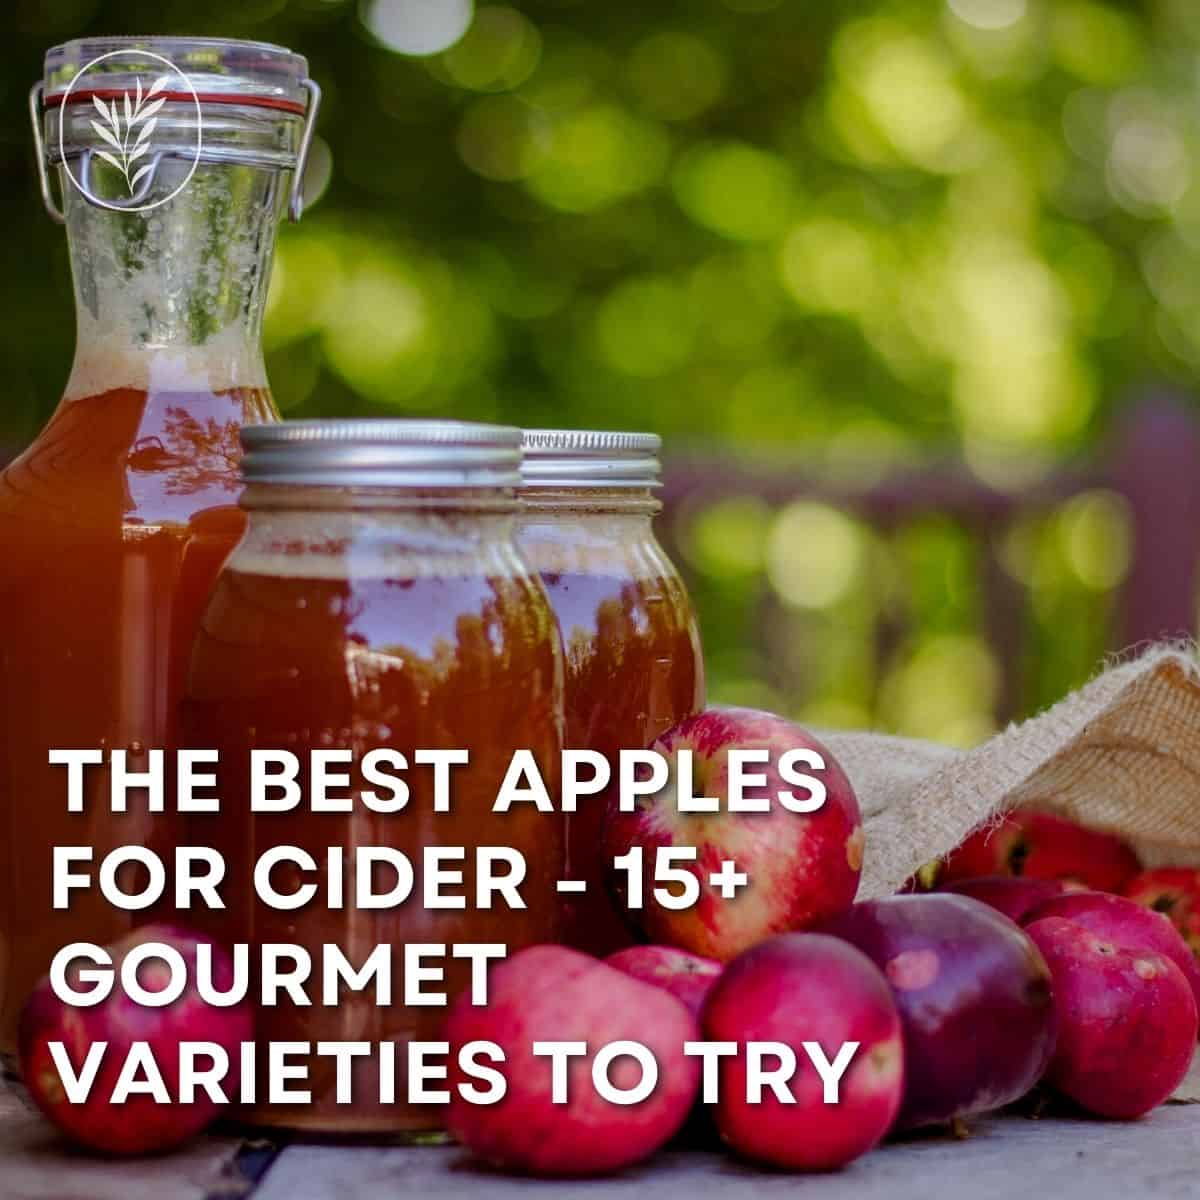 The best apples for cider - 15+ varieties to try - instagram via @home4theharvest